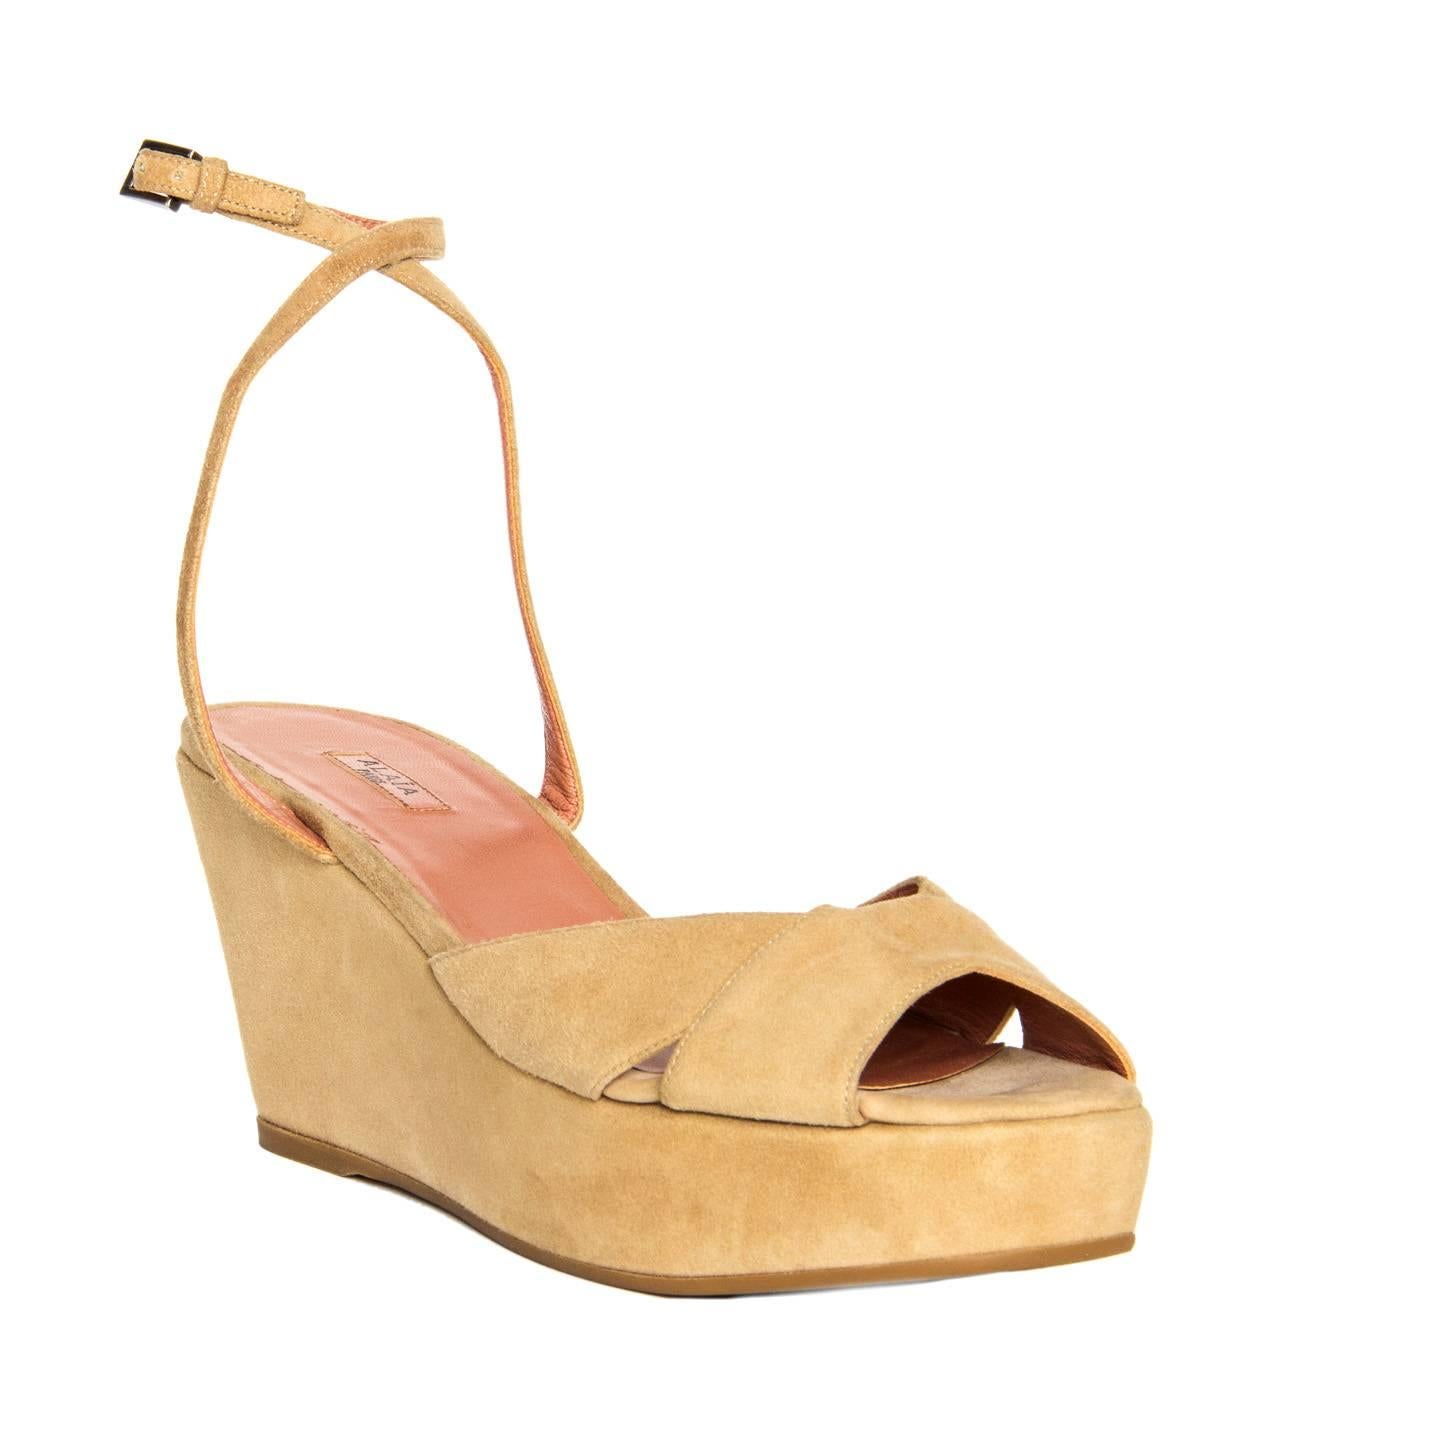 Vintage style tan suede platform wedges with open front and single heel strap. Made in Italy. Wedges heel: front 1.5